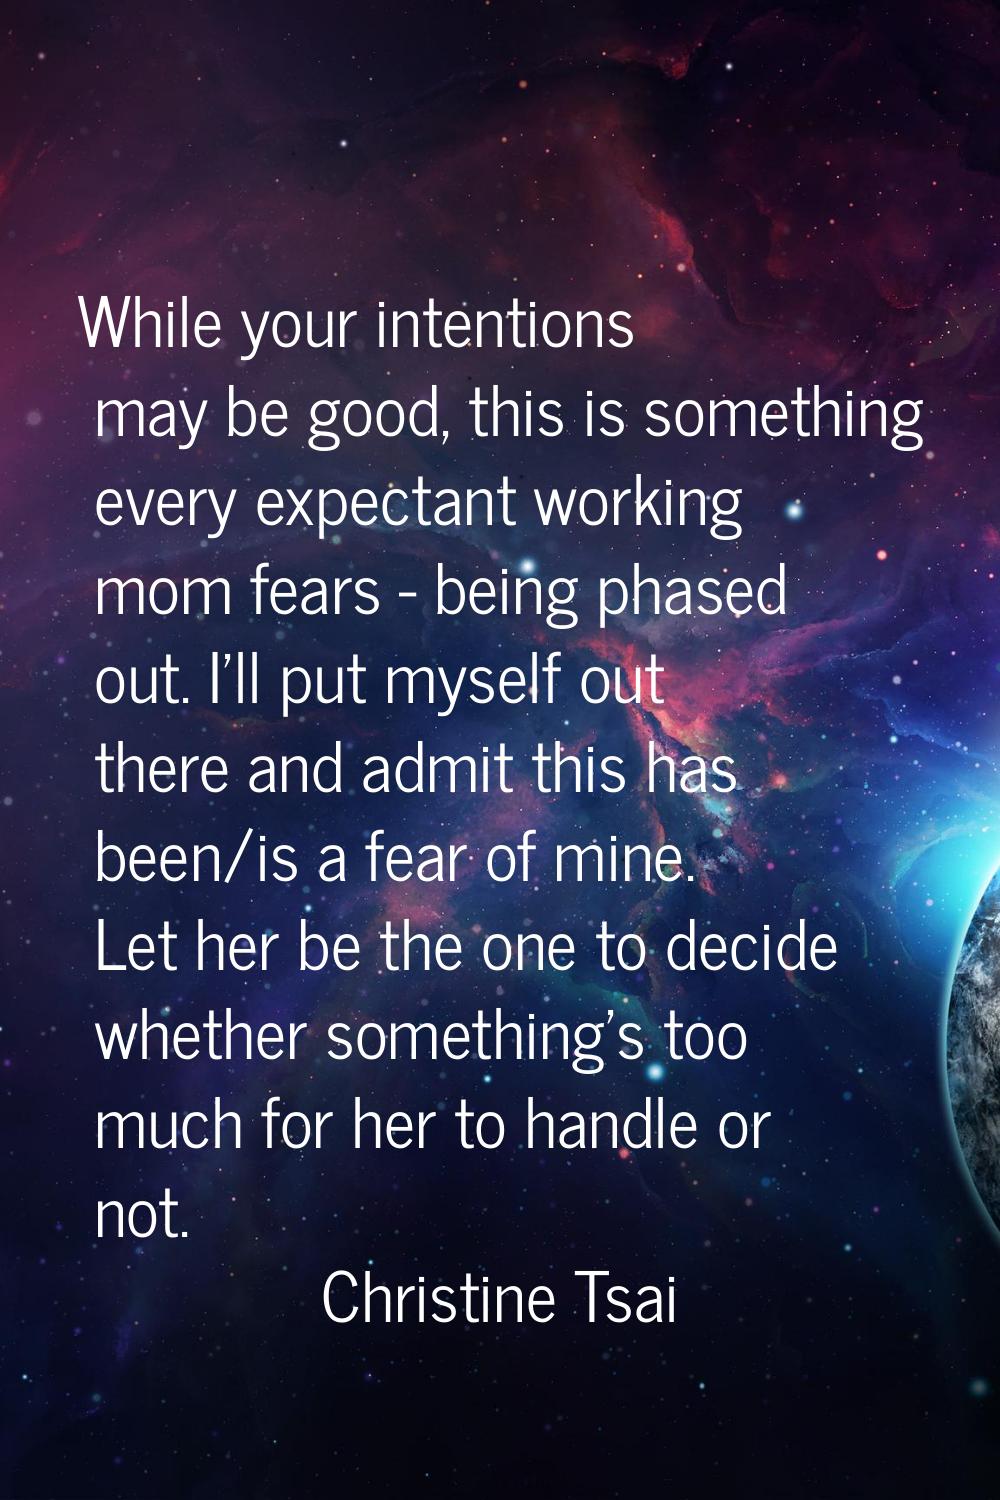 While your intentions may be good, this is something every expectant working mom fears - being phas